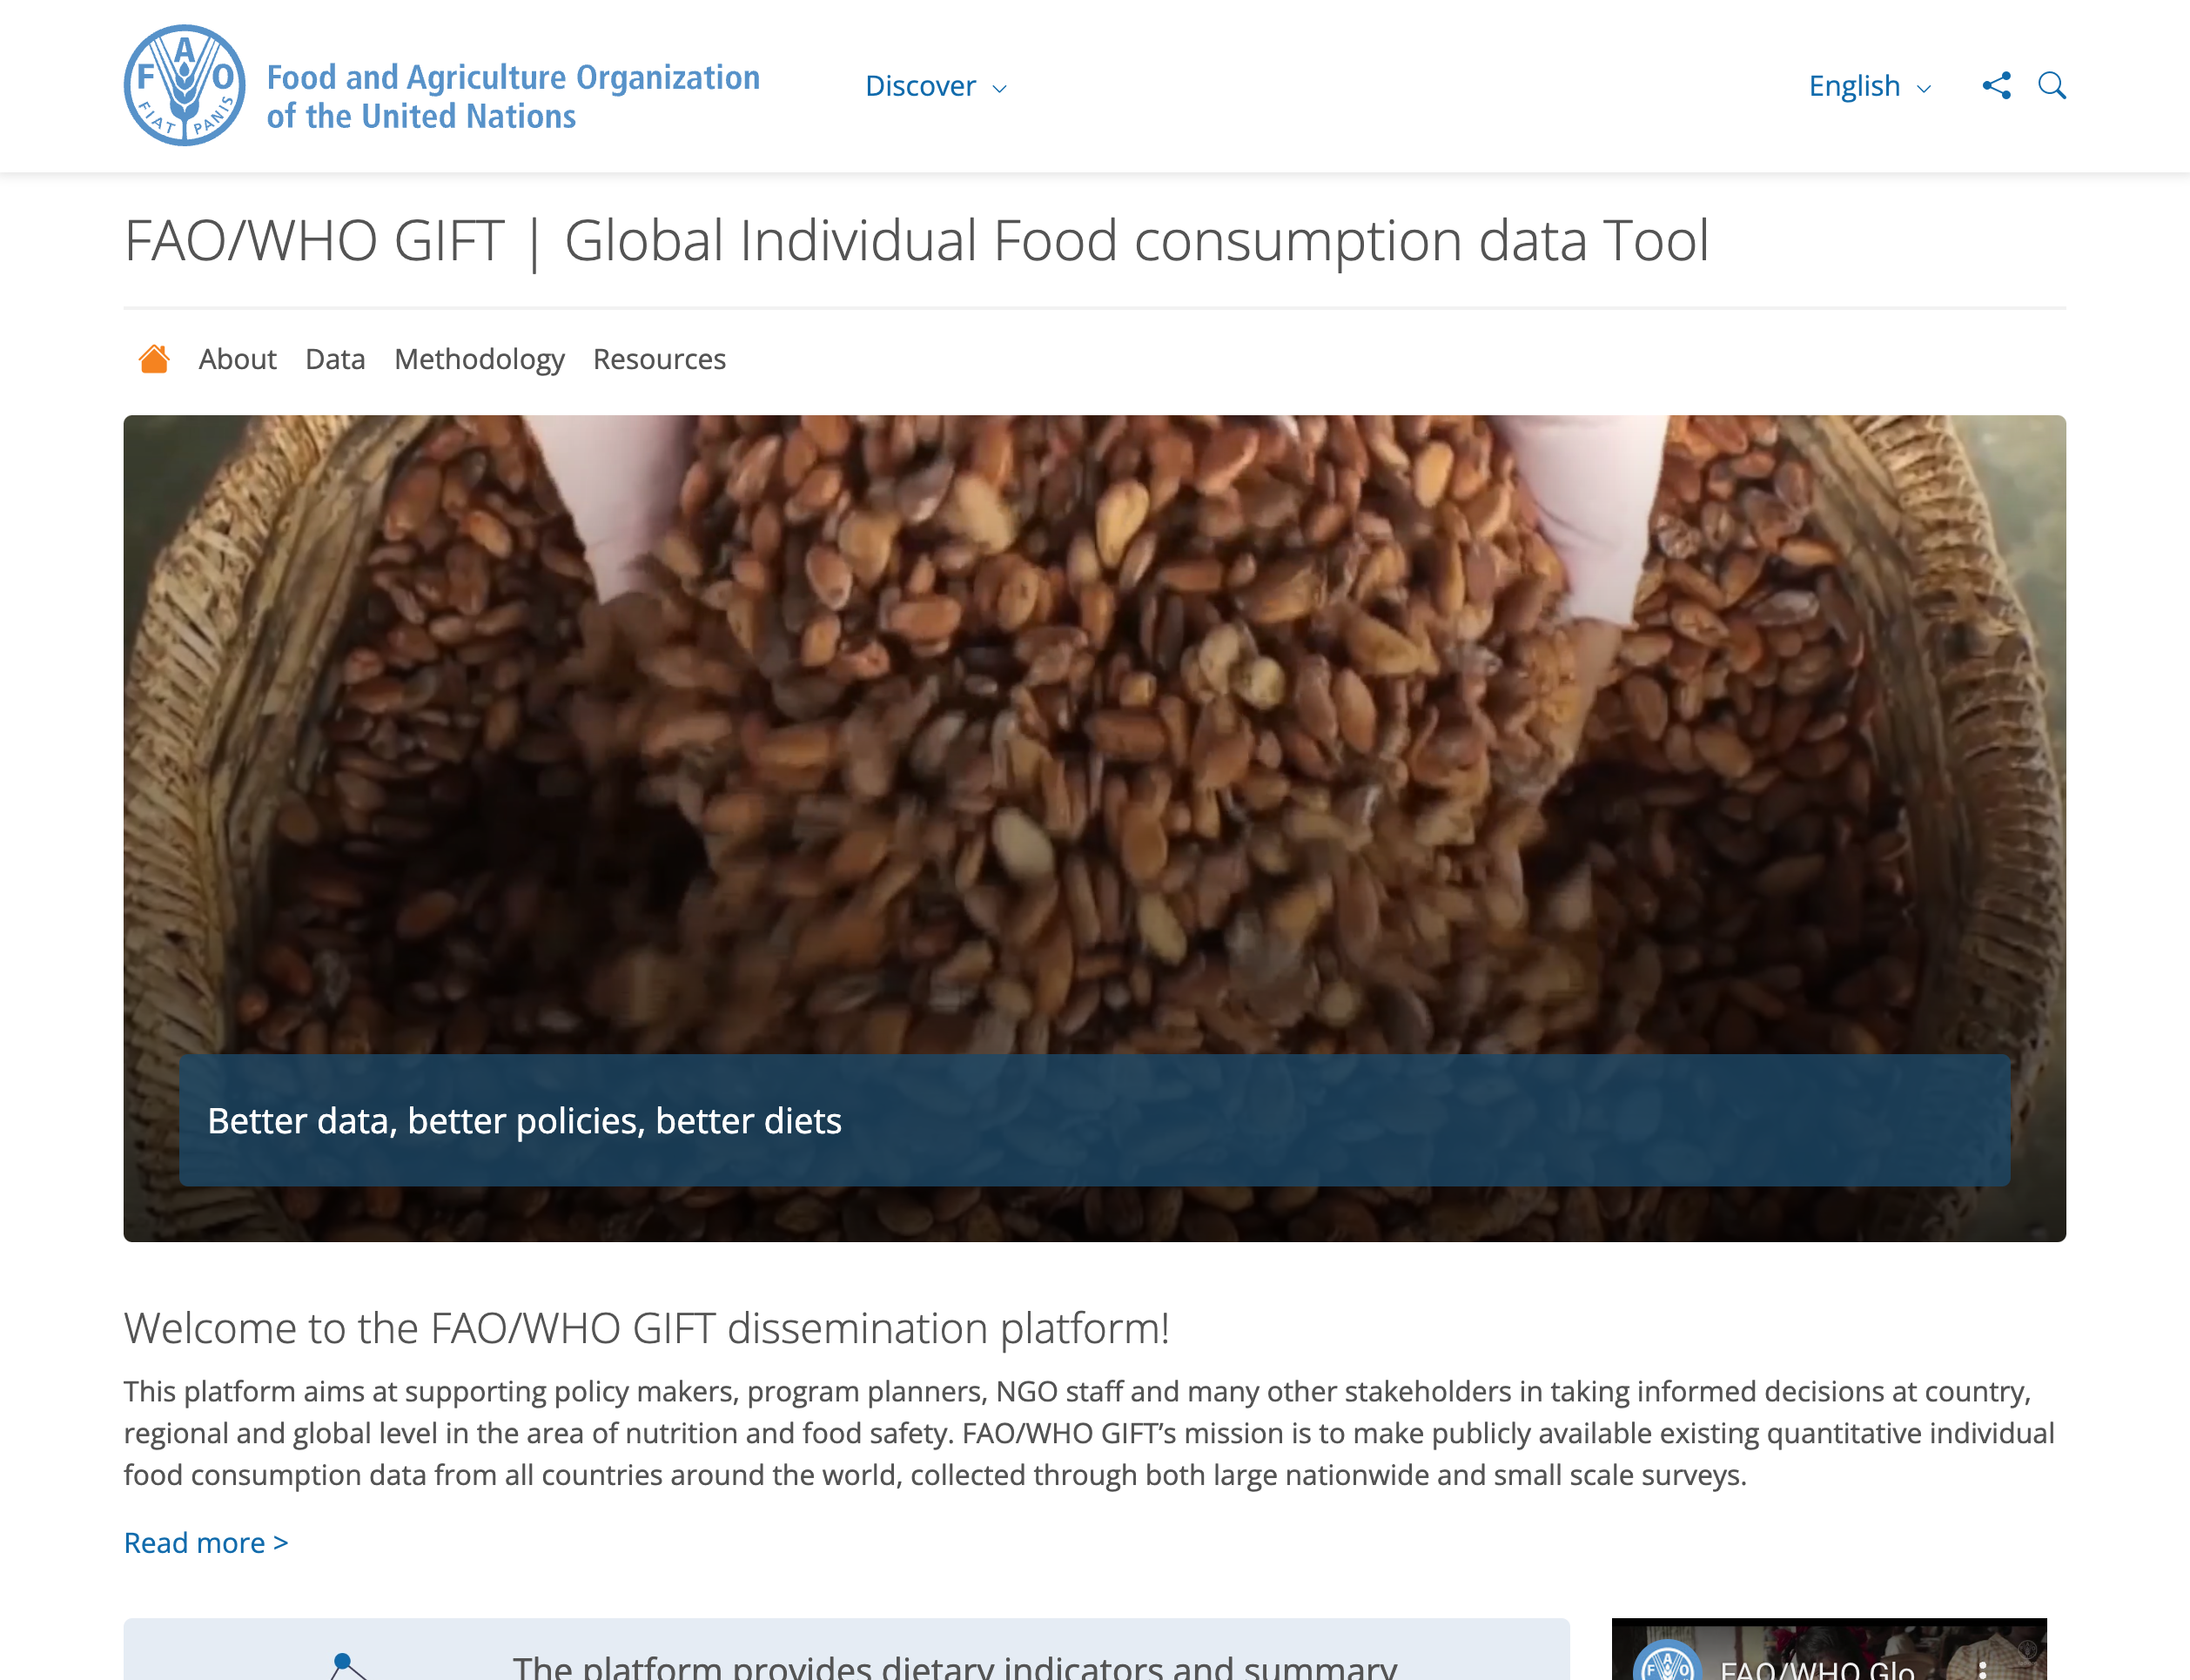 FAO/WHO Global Individual Food Consumption data Tool (GIFT)